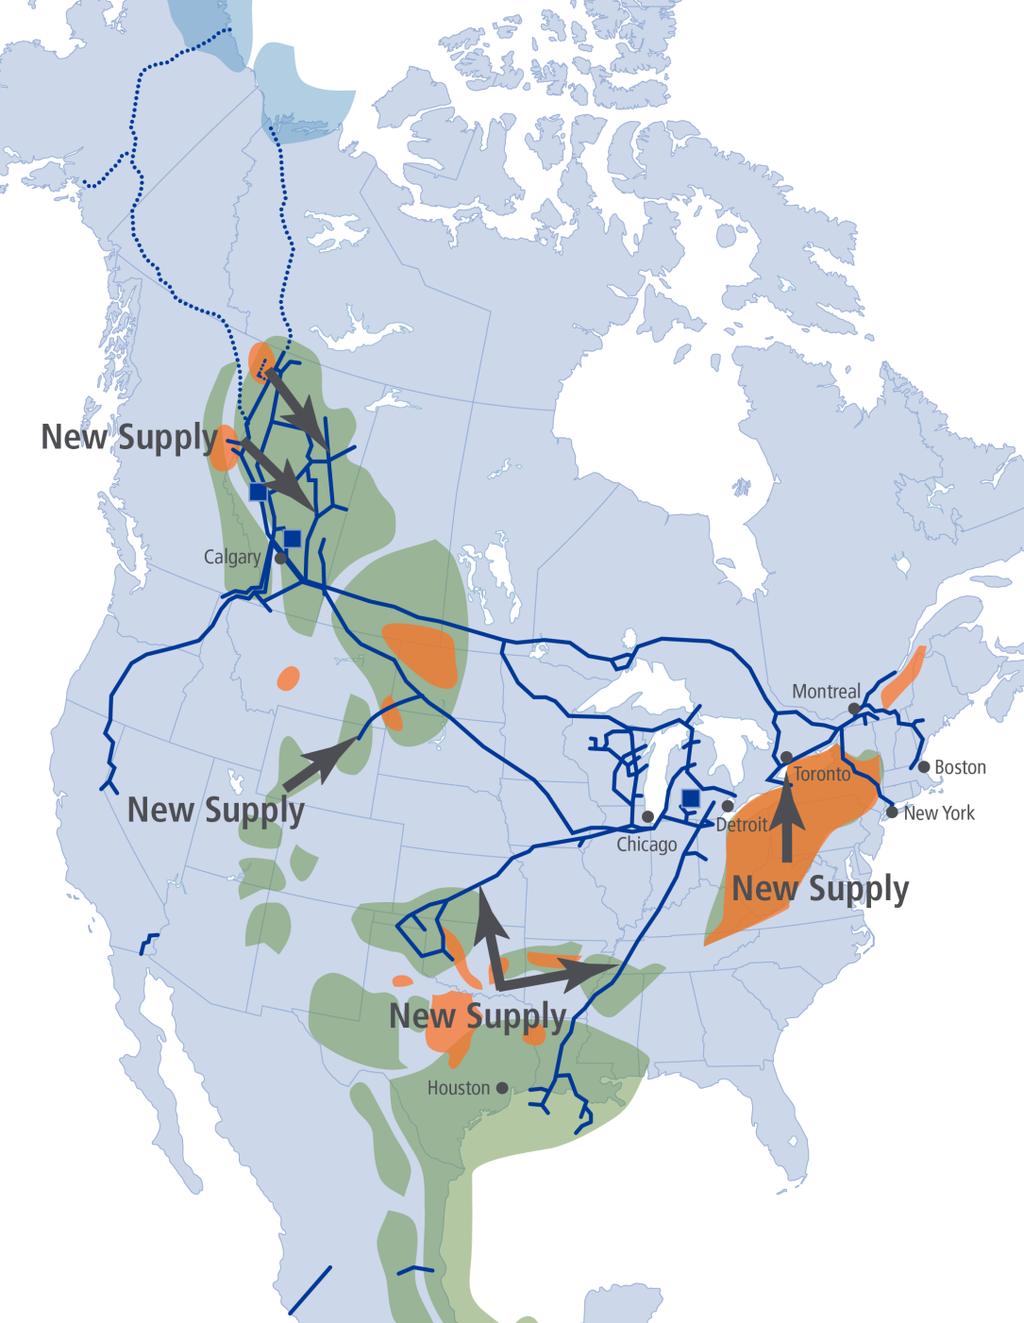 Linking Natural Gas Supply to Key Markets The TC pipeline network taps into virtually every major North American